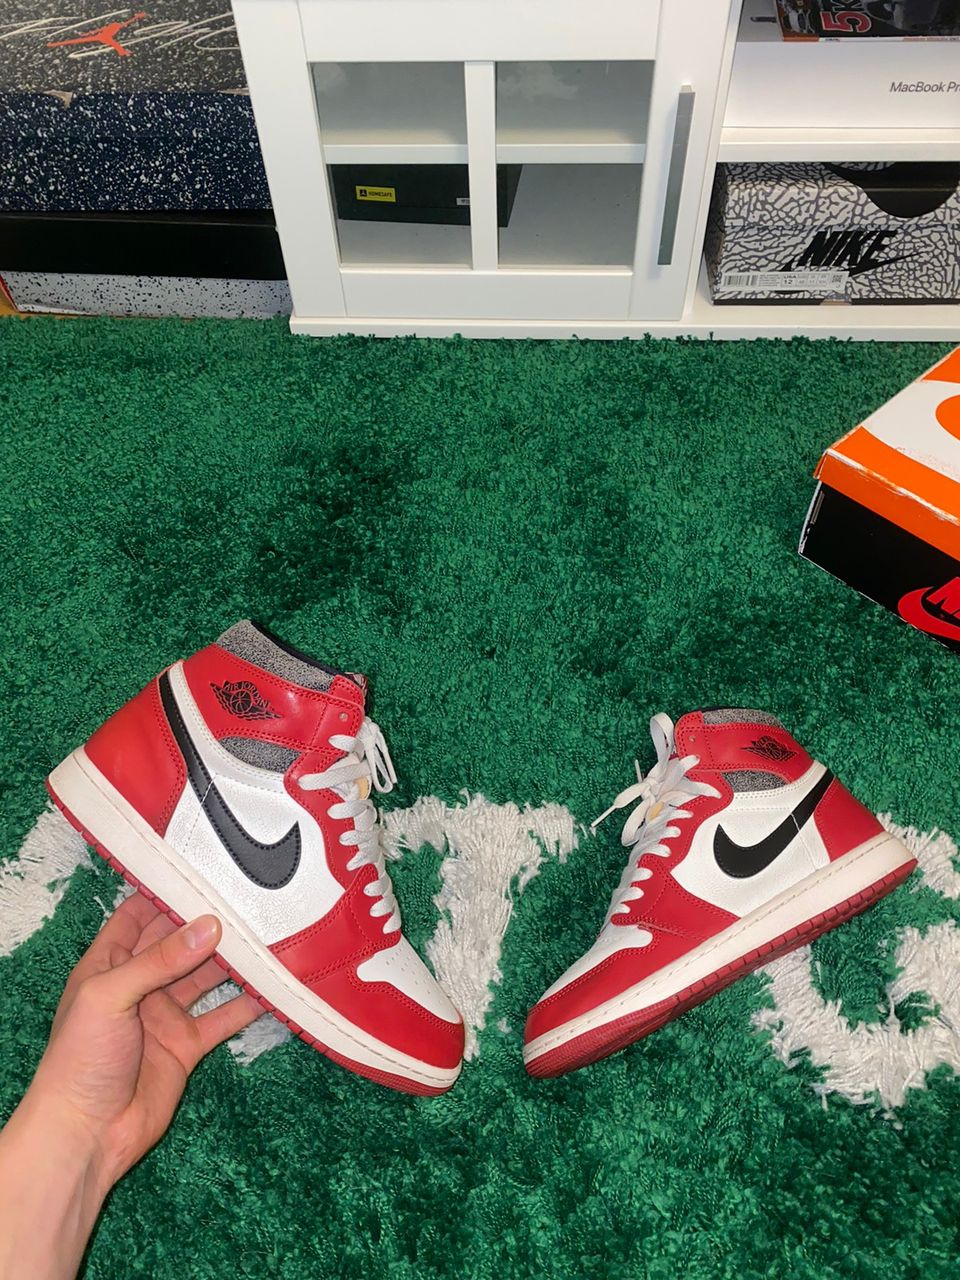 Air Jordan 1 High Chicago Lost And Found